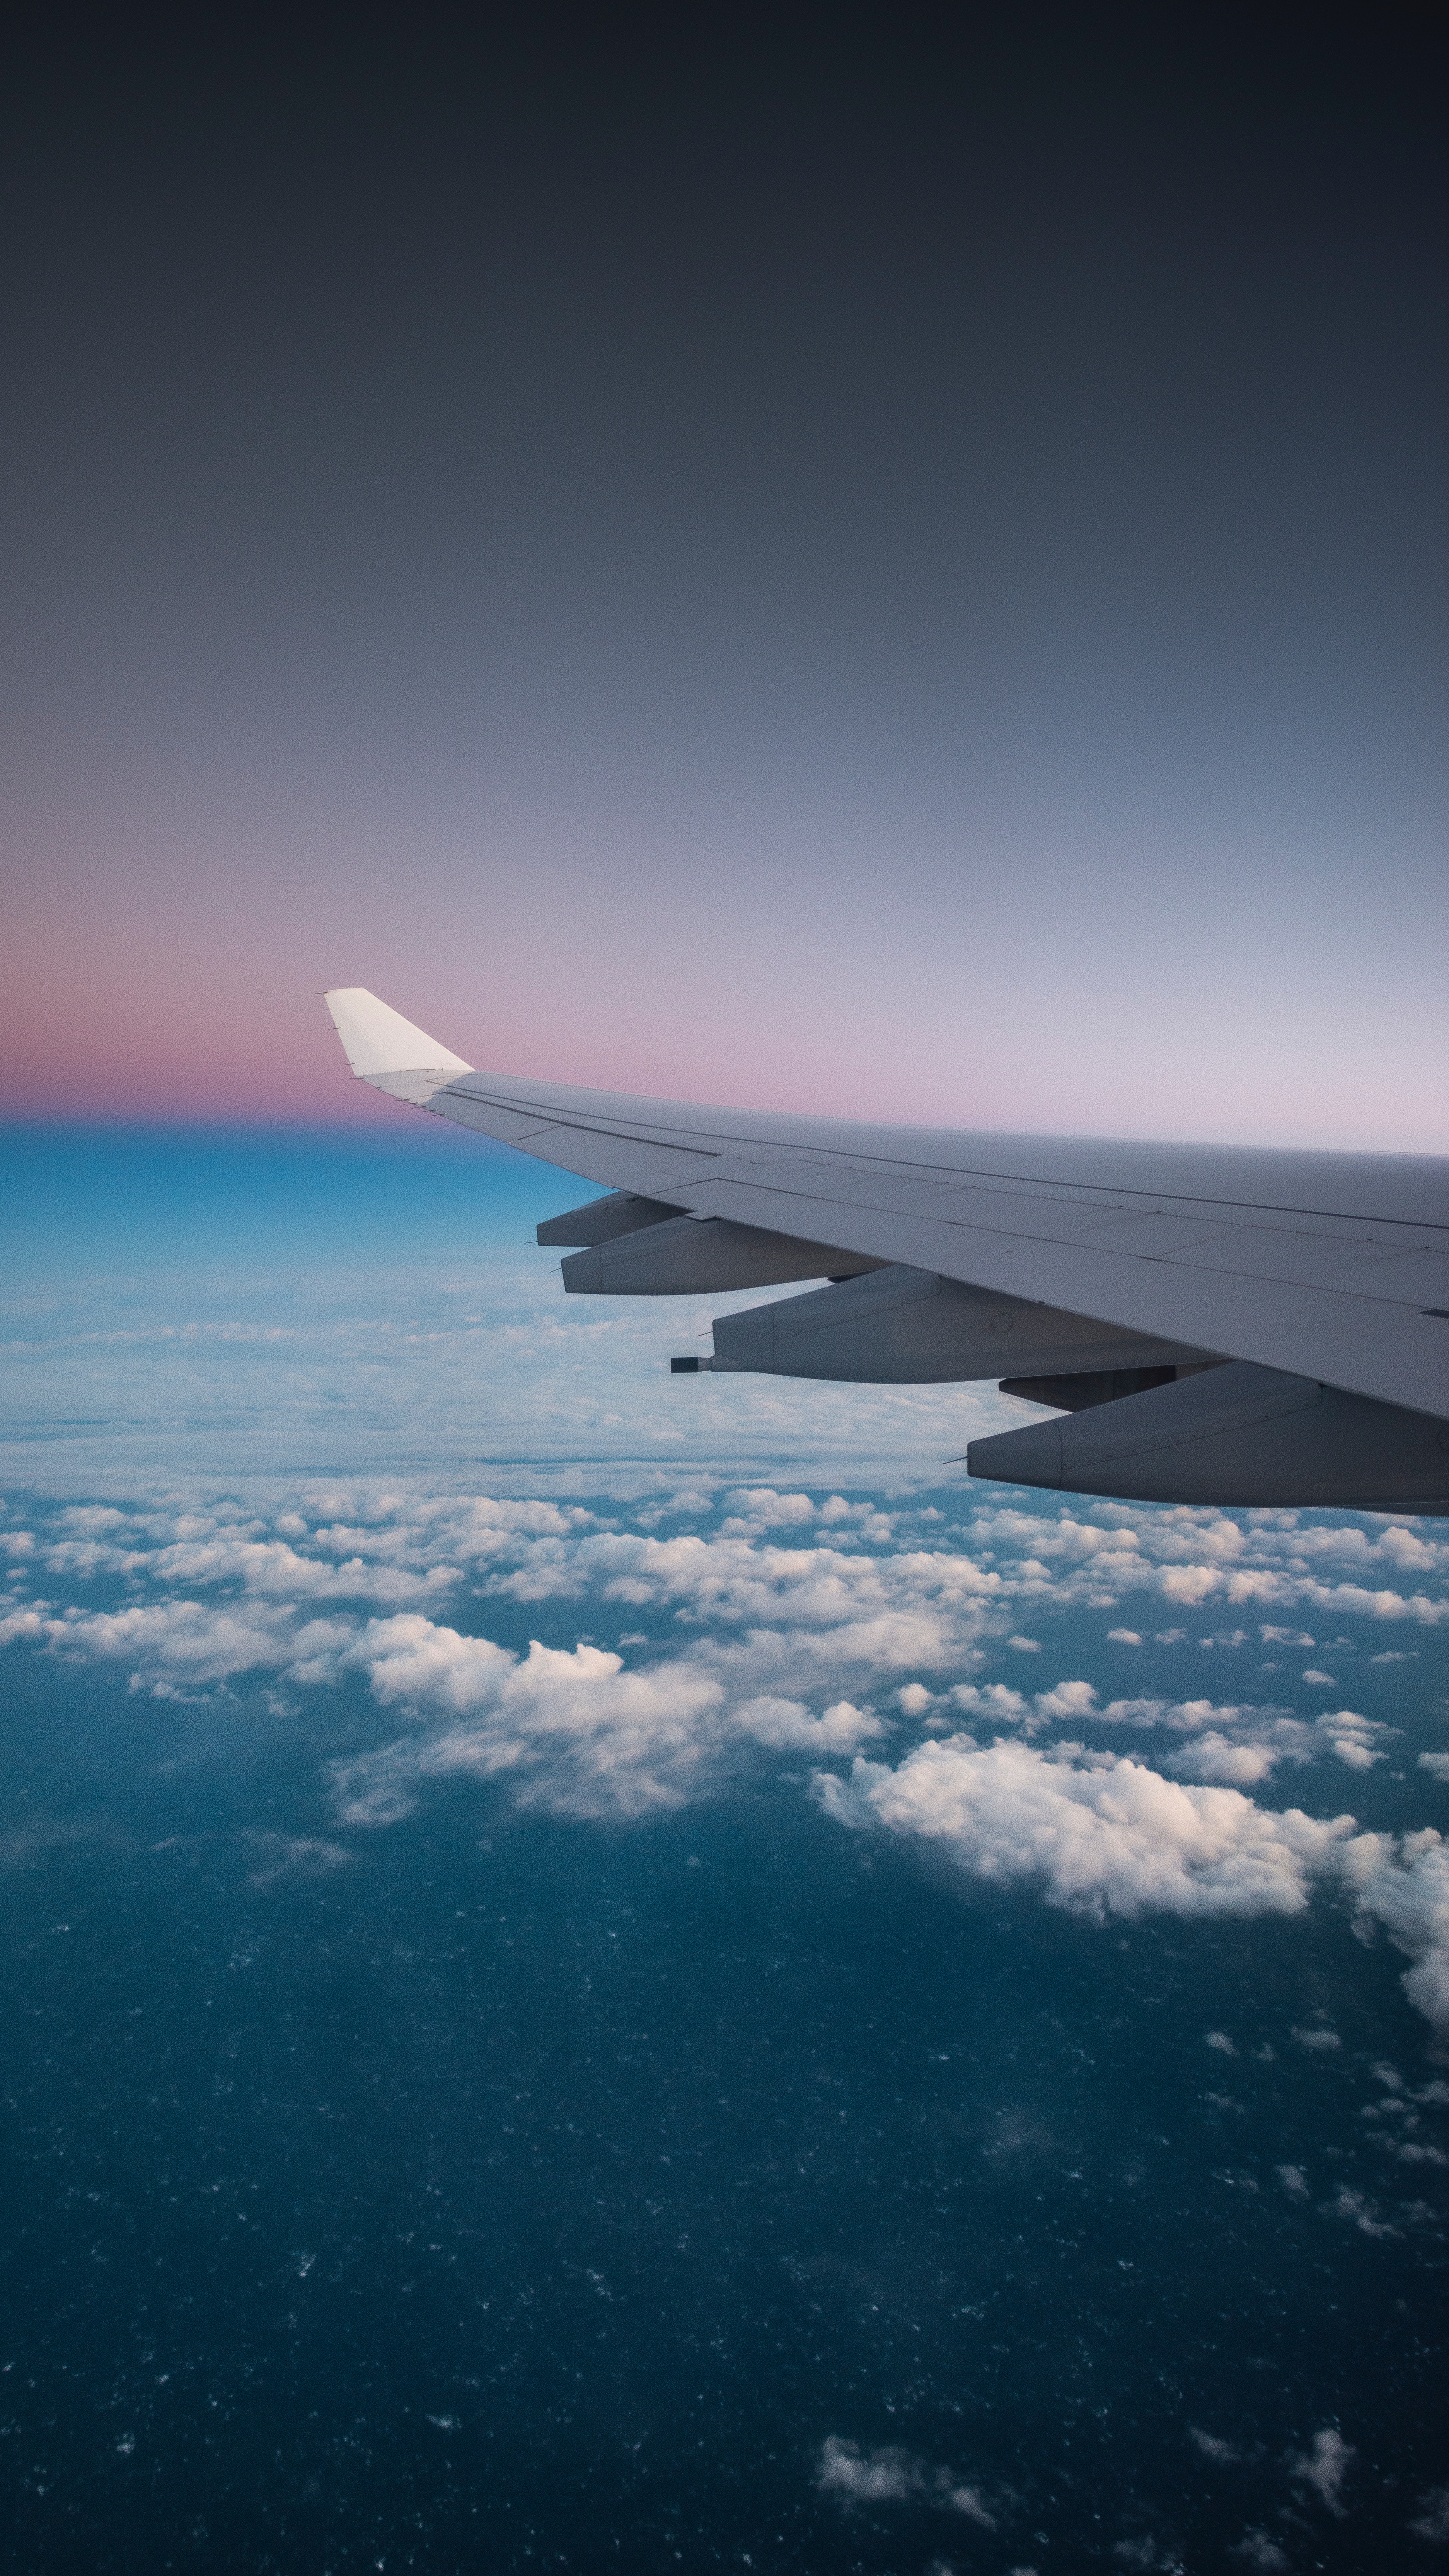 overview, flight, nature, clouds, review, airplane wing, wing of the plane